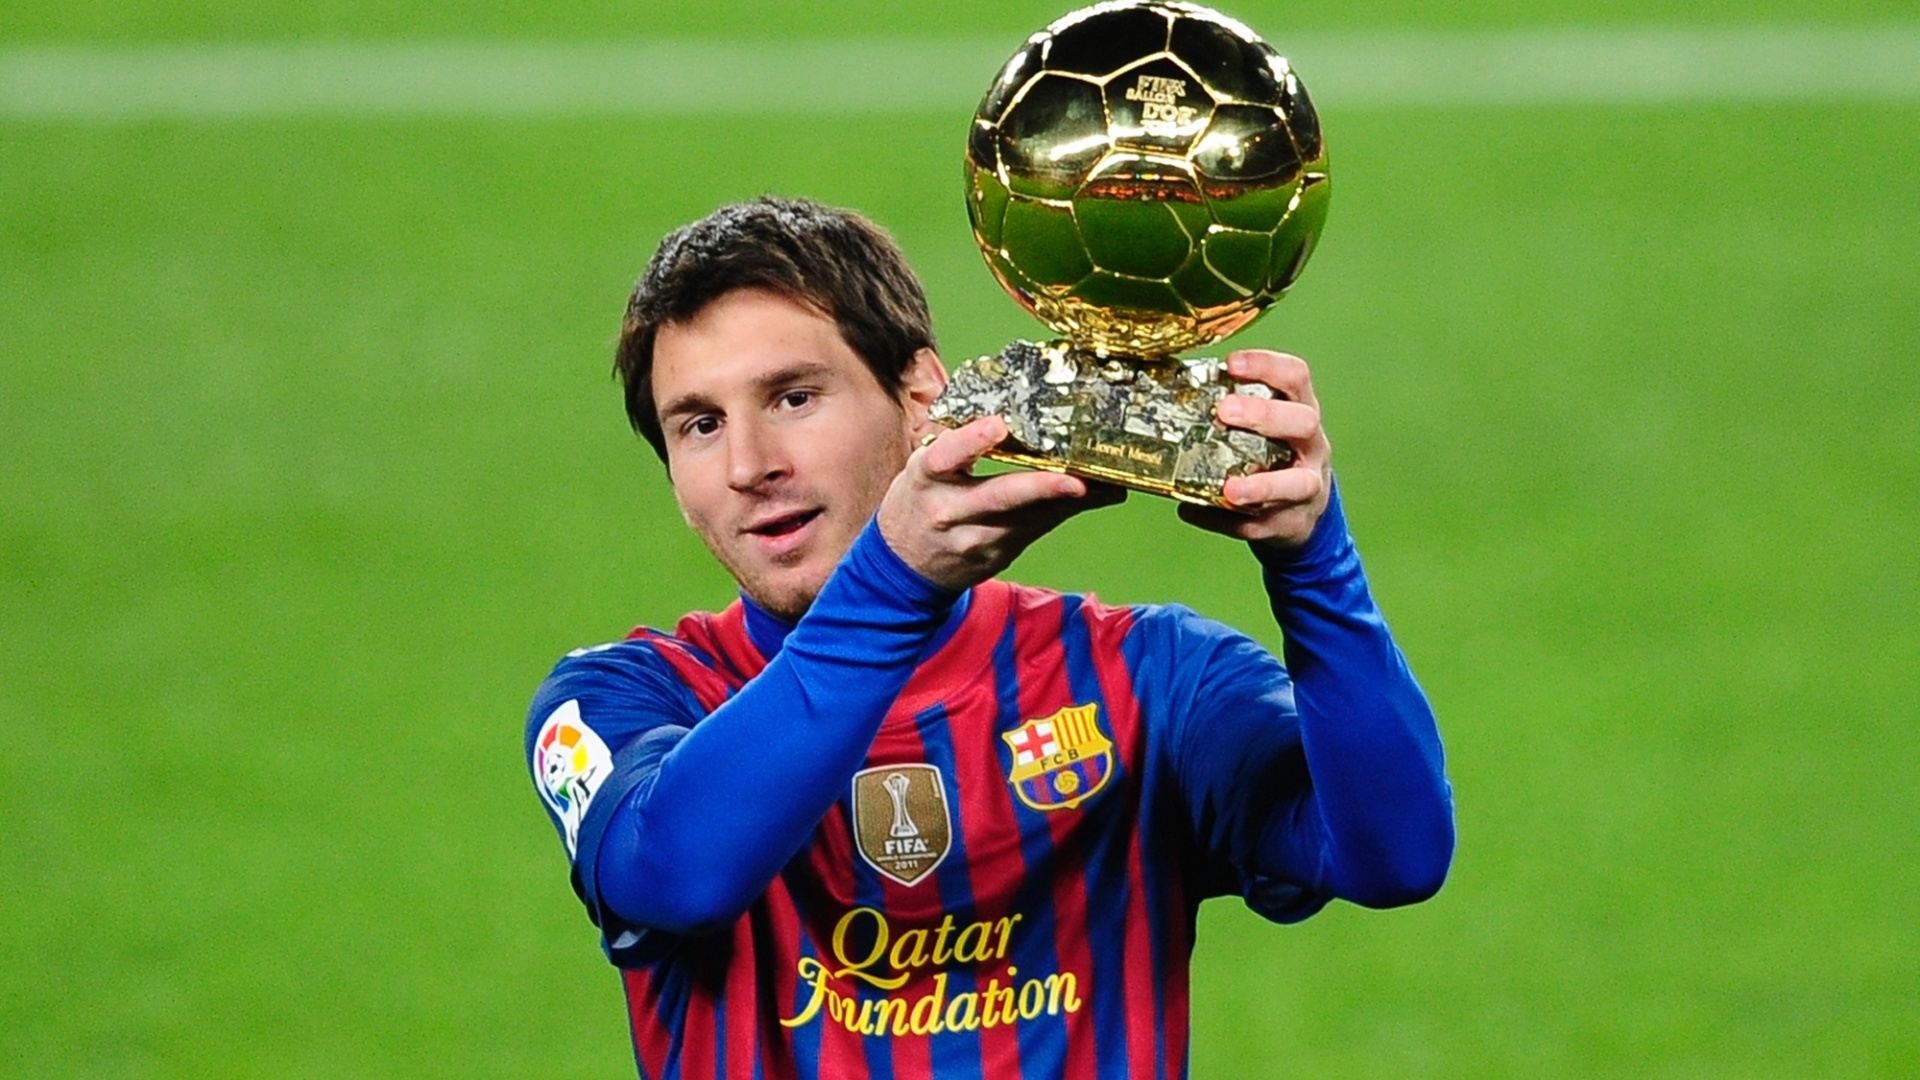 Lionel Messi Cup Hd Free Football Player Background Mobile Desktop Download Wallpaper Pictures